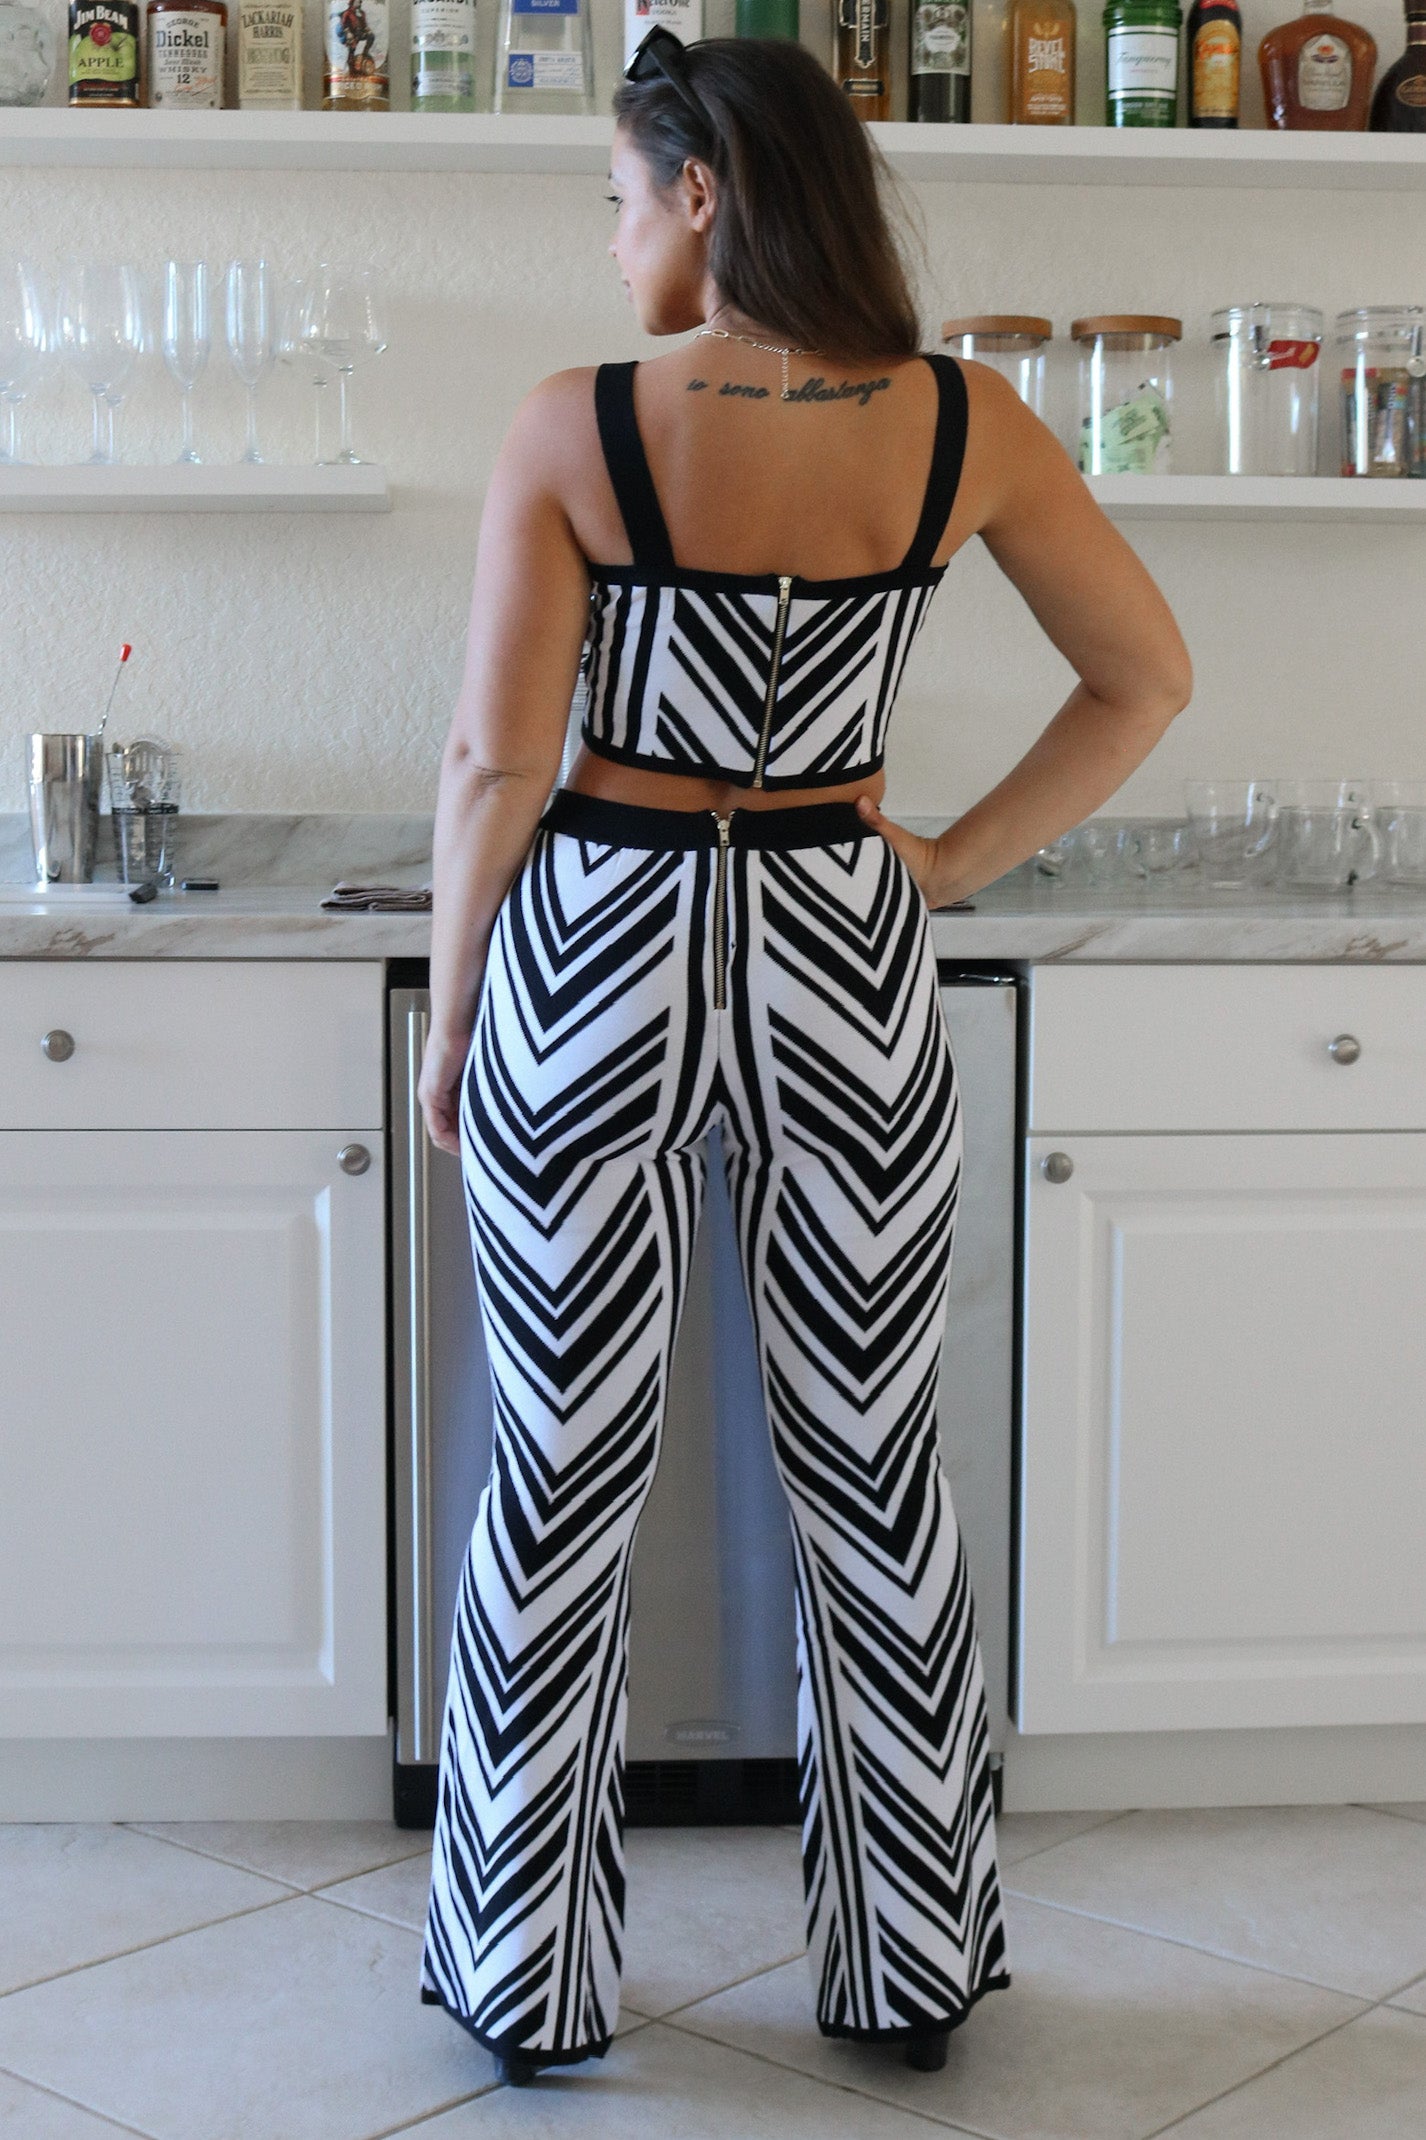 Woven Striped Boot Cut Pant Set with Matching Tube Tank Top in Black and White. Scarlette The Label, an online fashion boutique for women.